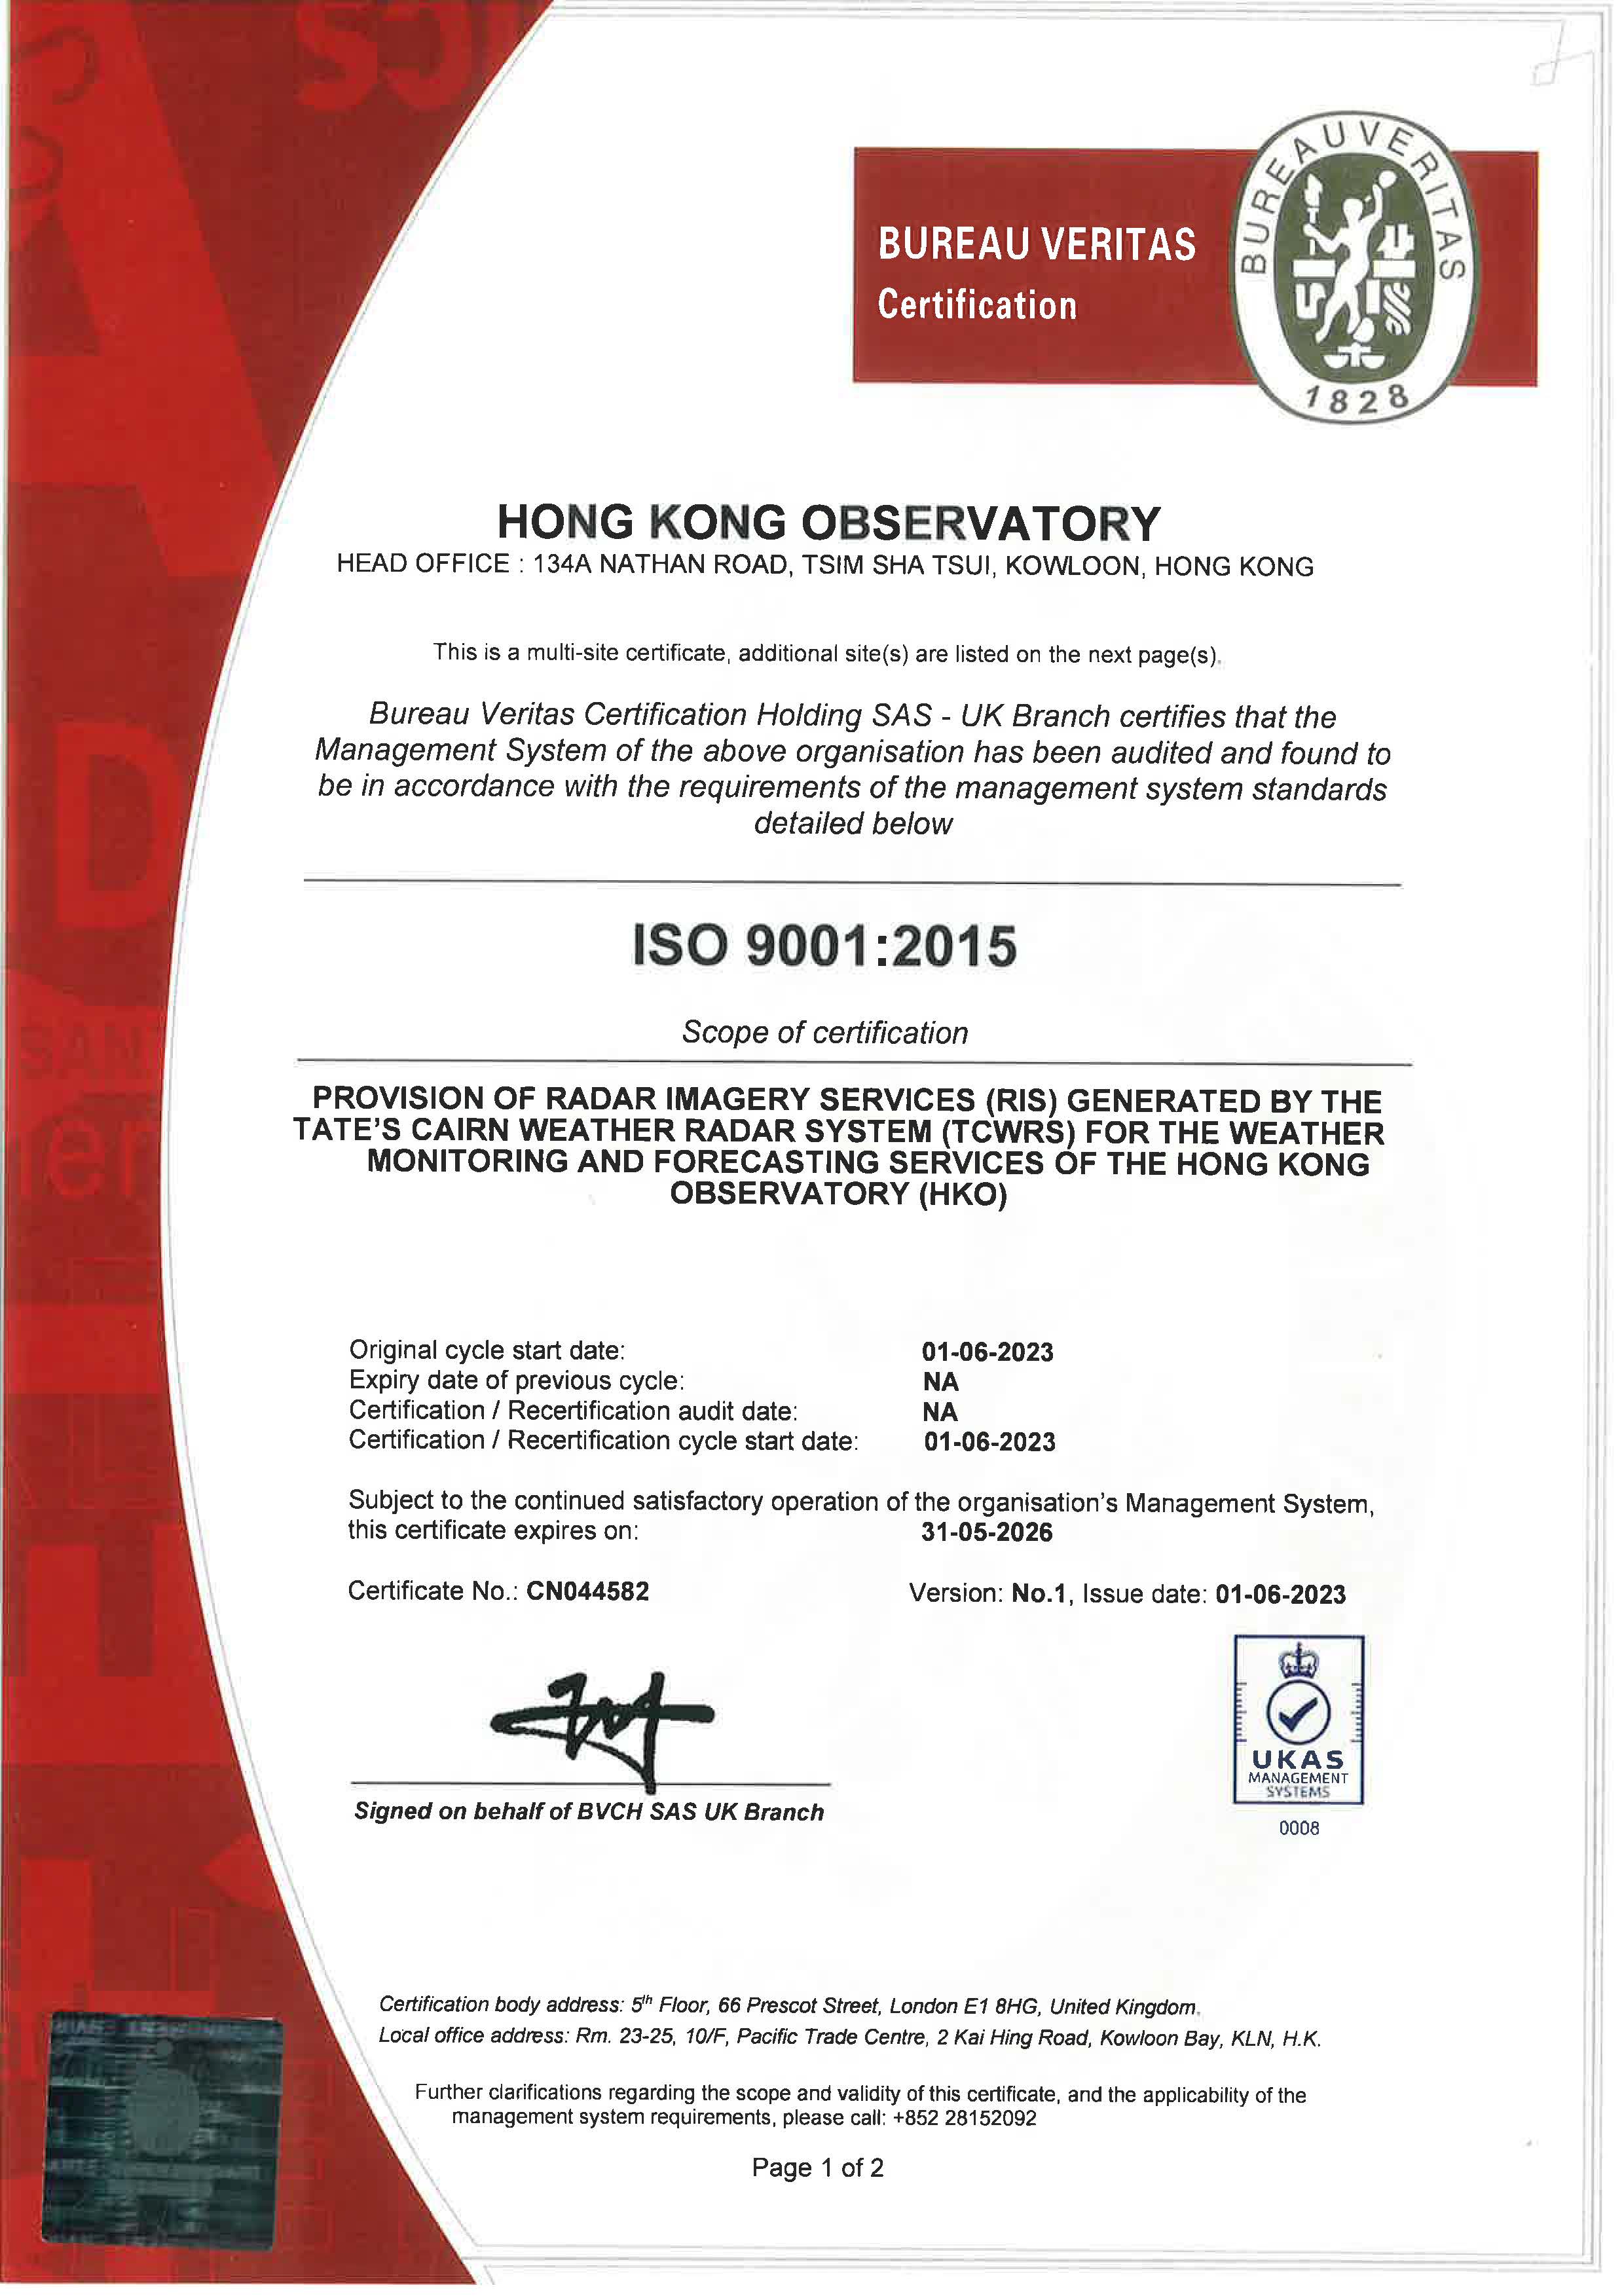 ISO Certificate for Radar Imagery Services